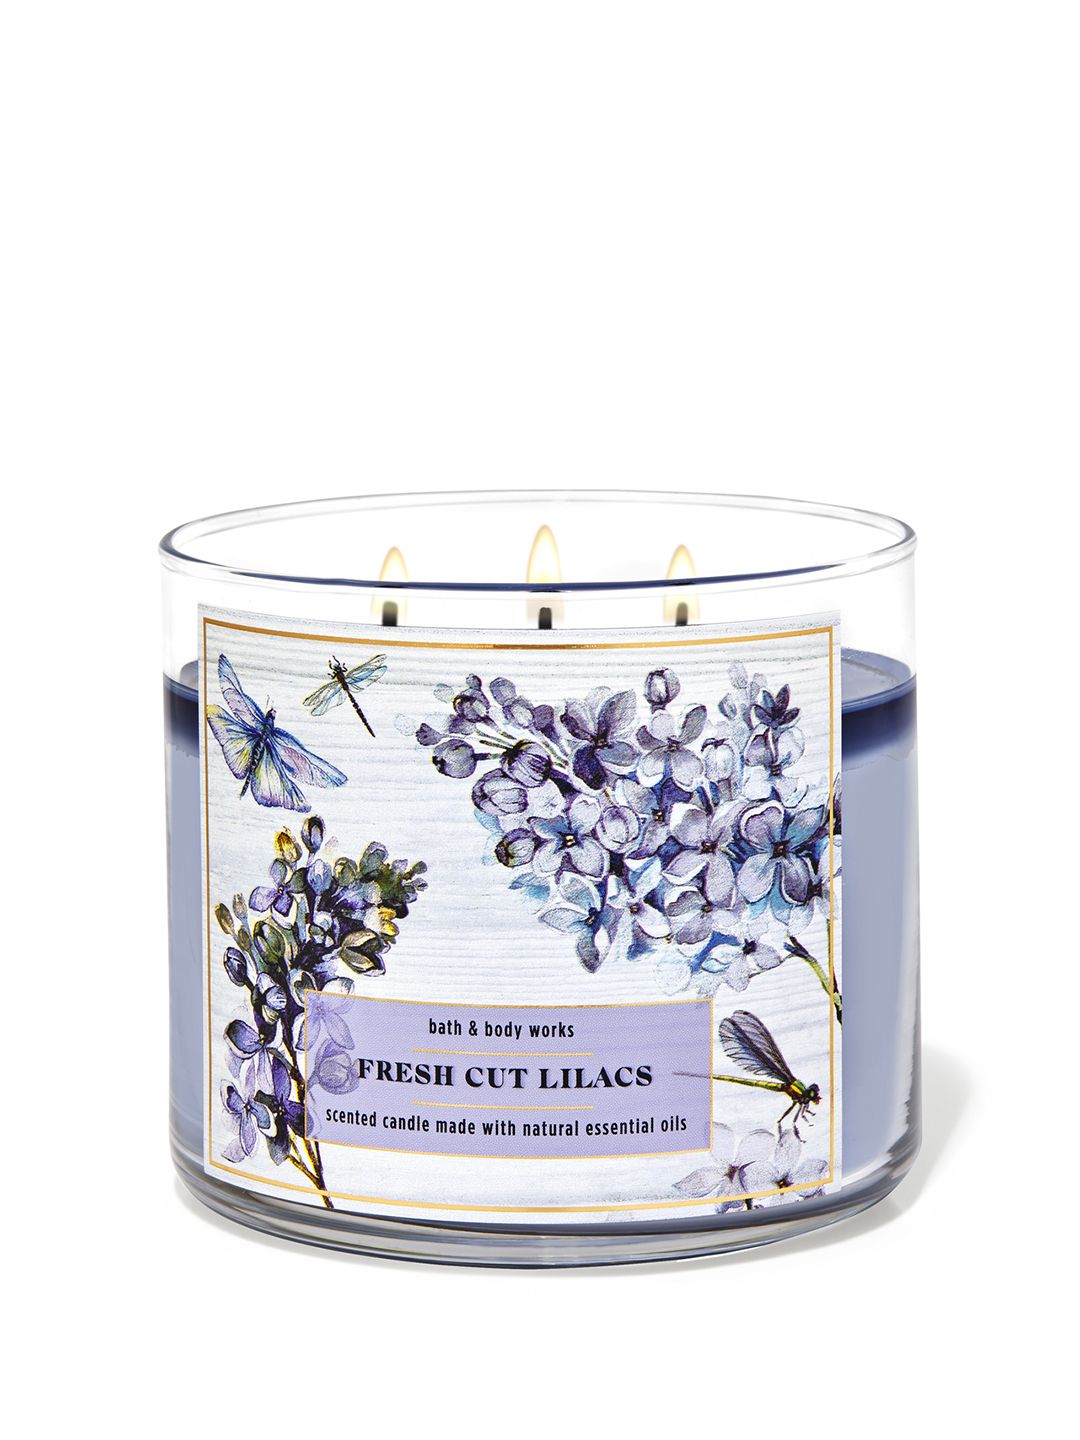 Bath & Body Works Fresh Cut Lilacs 3-Wick Scented Candle - 411 g Price in India